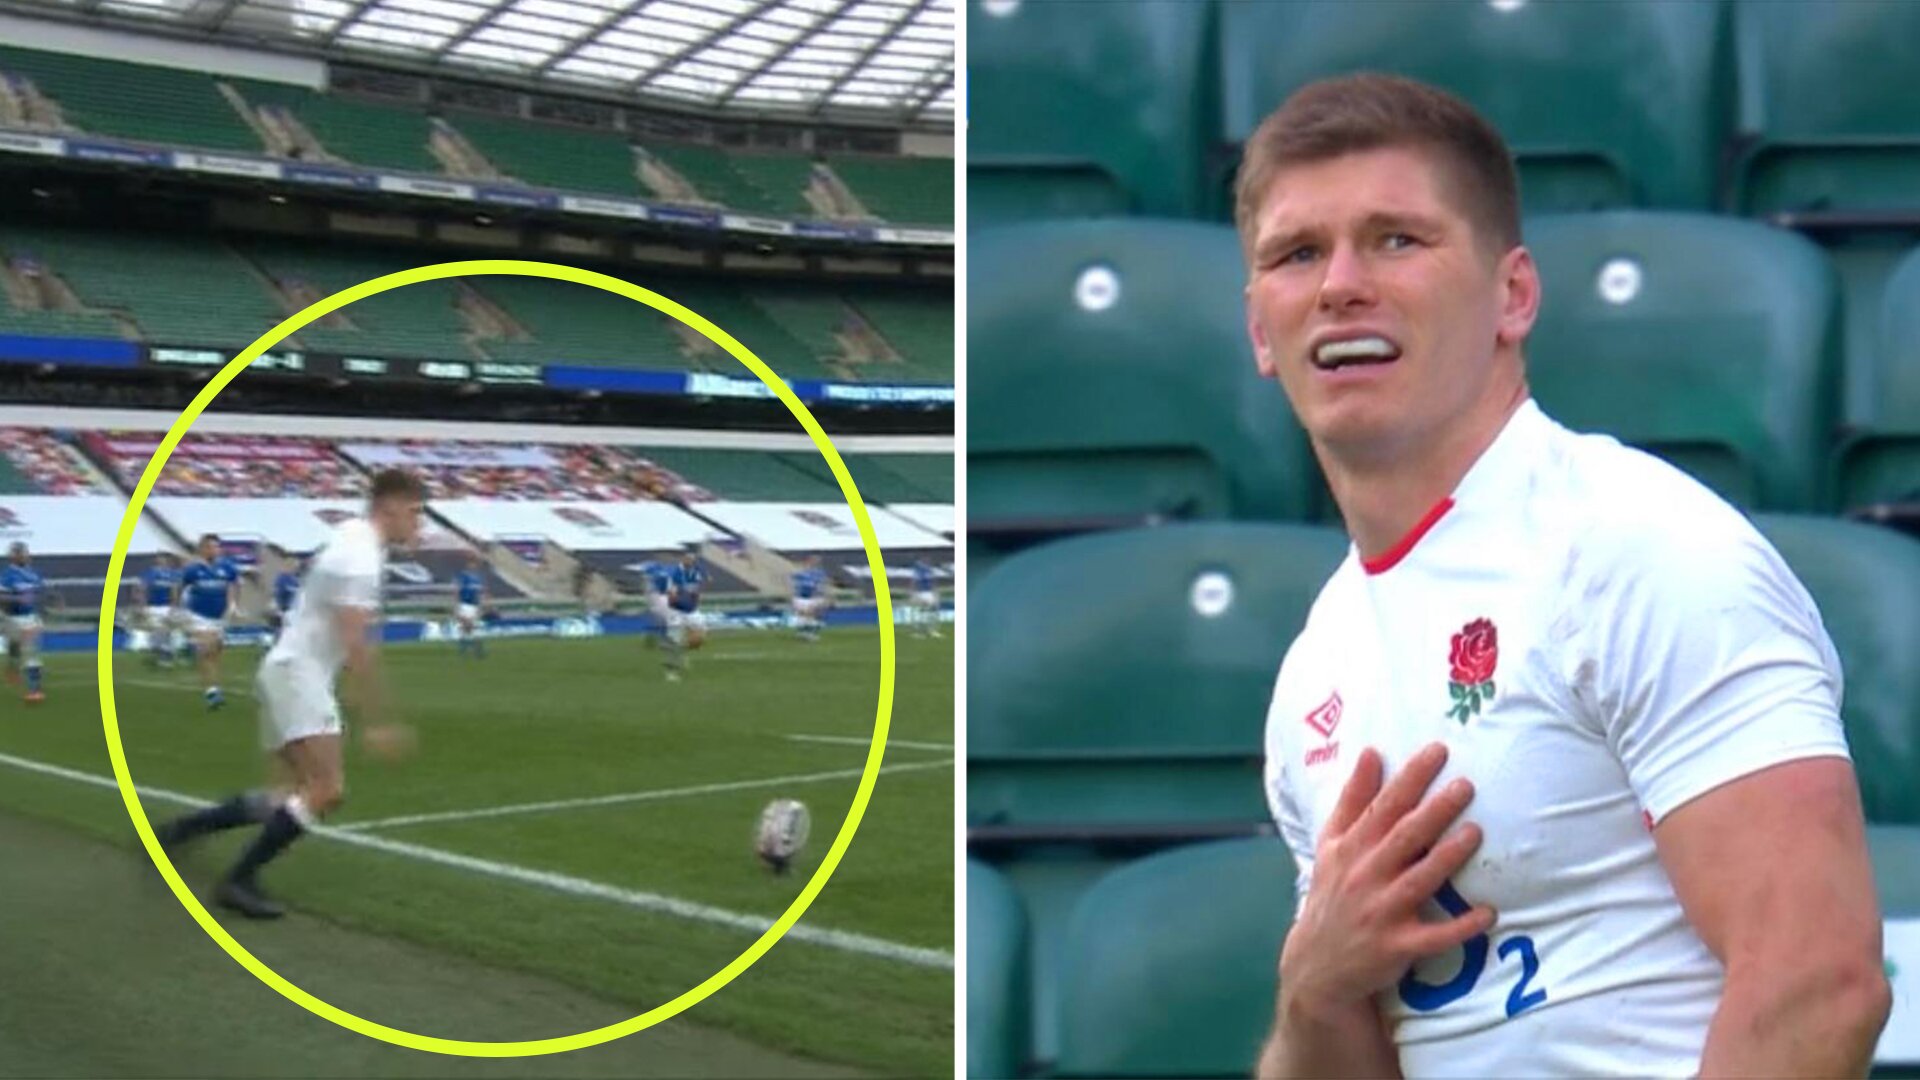 Listen as players heckle Owen Farrell into missing a kick